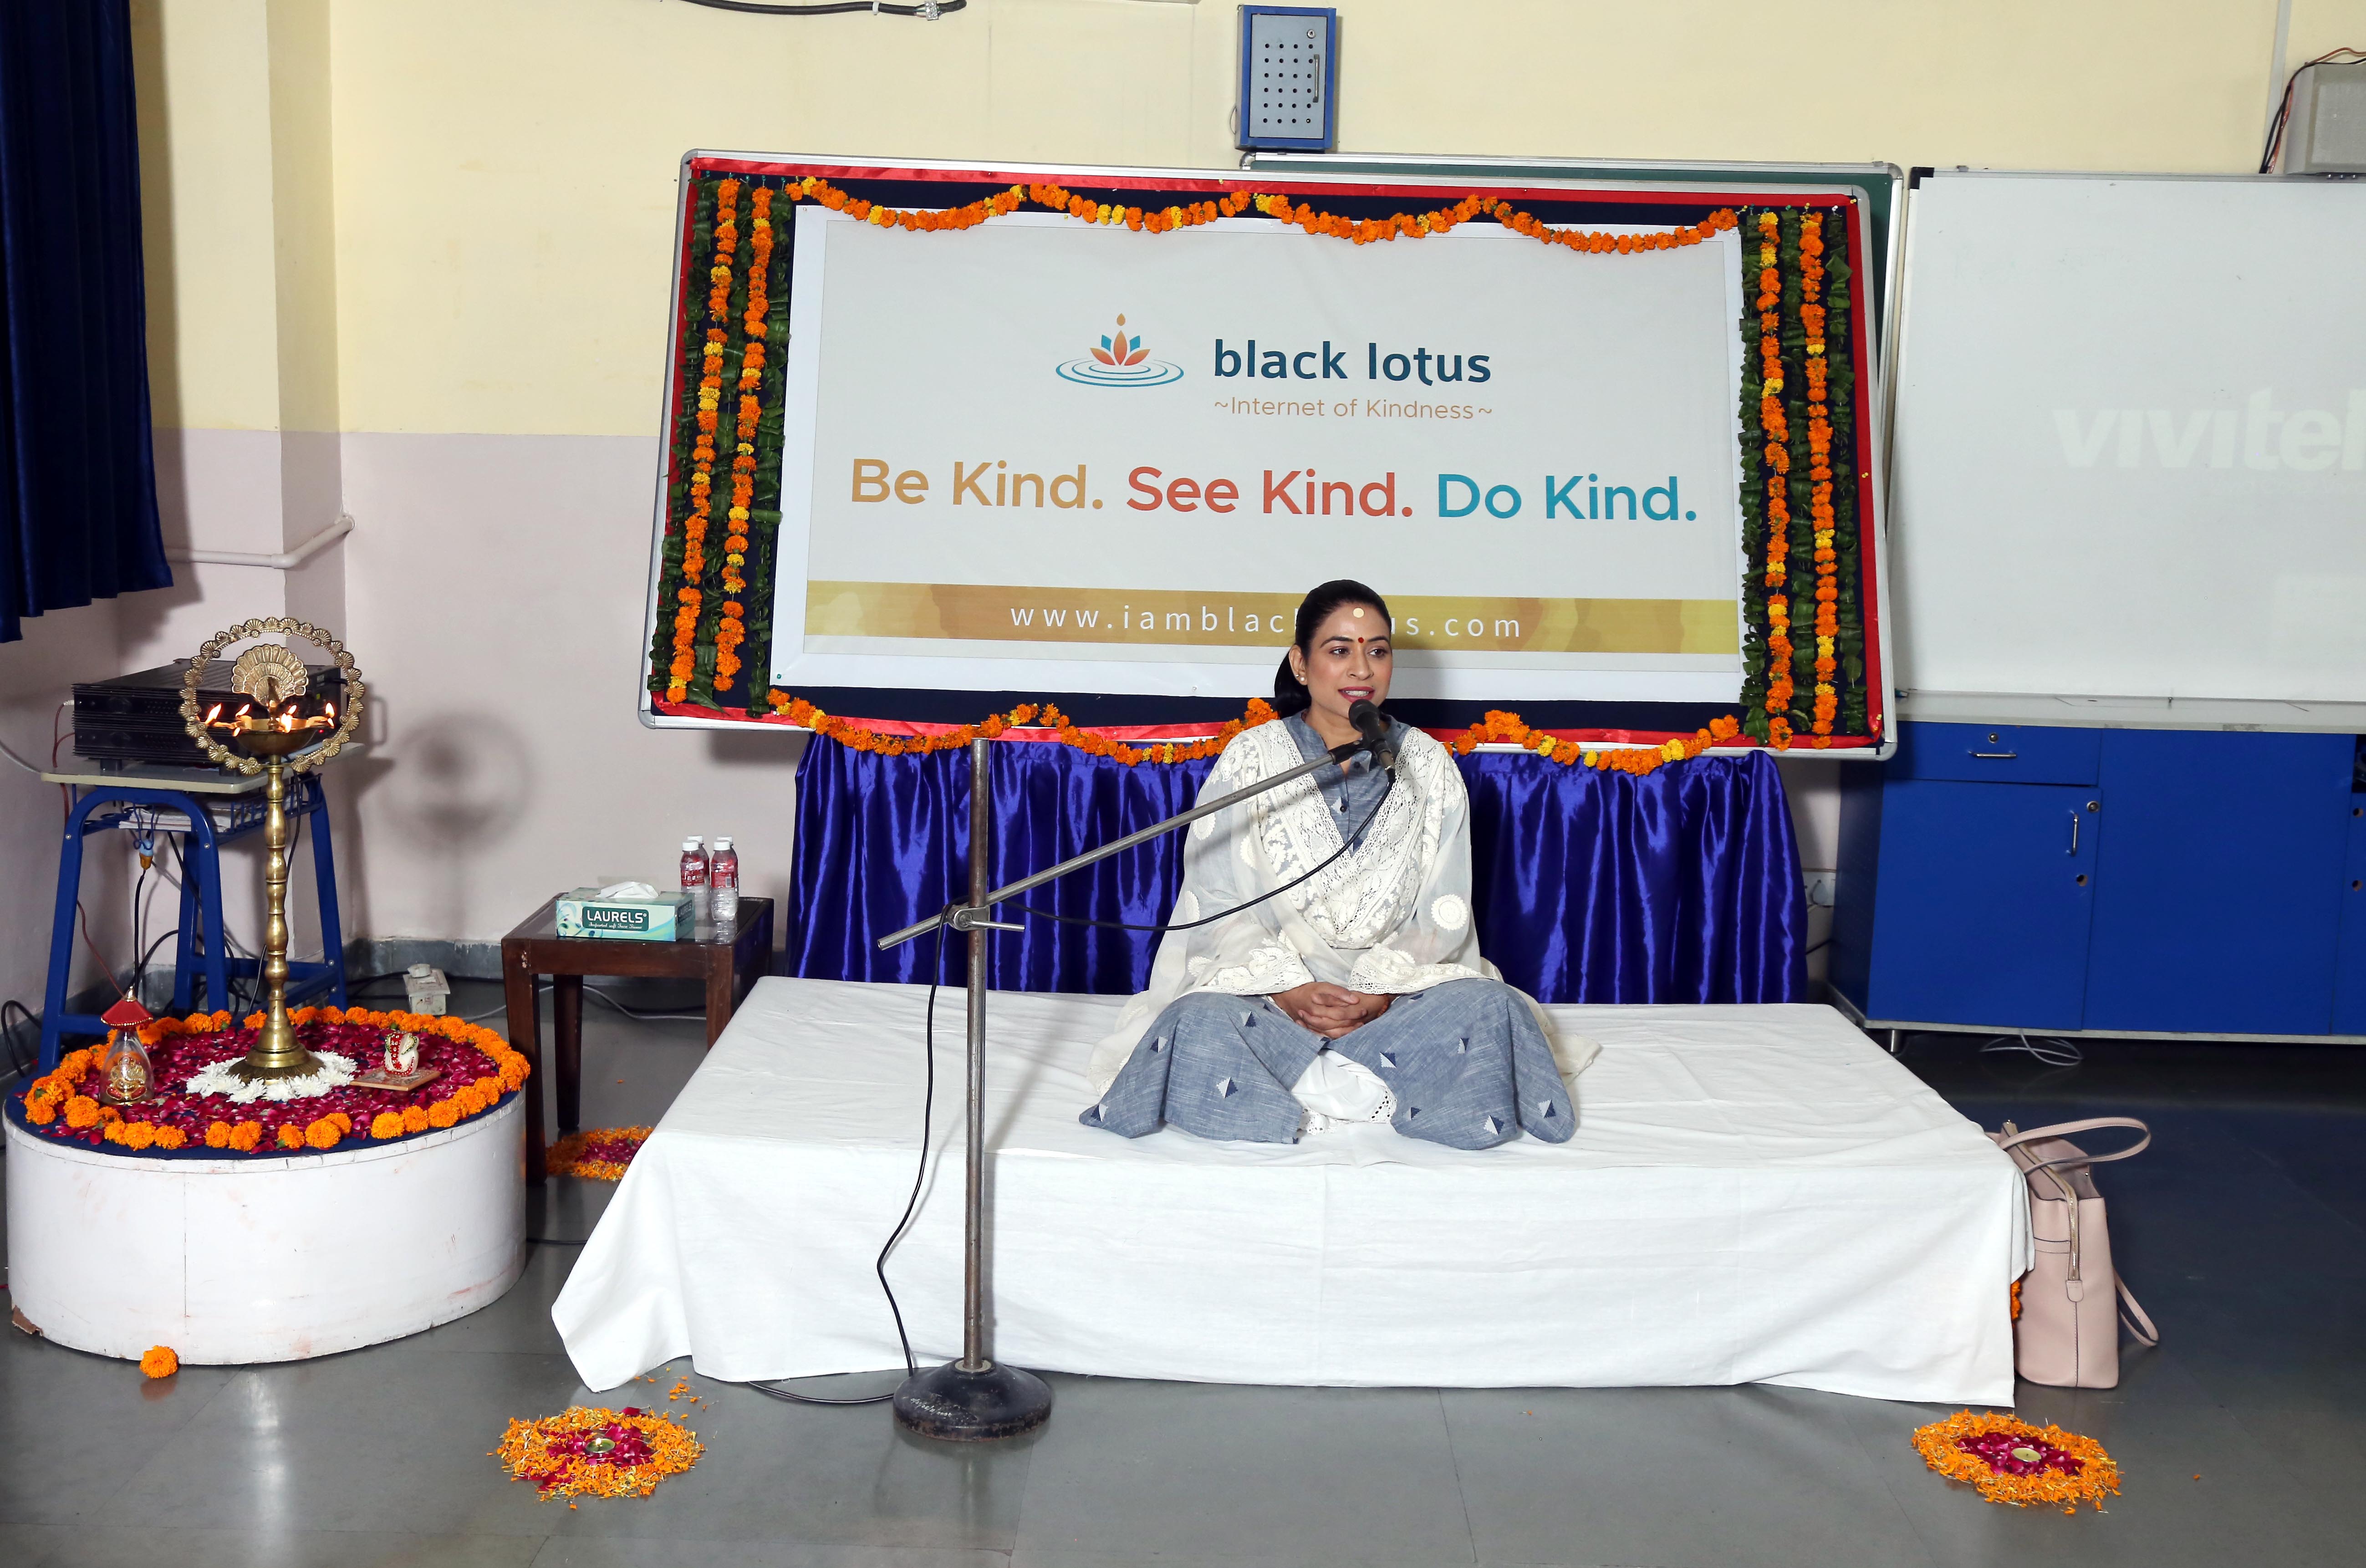 Black Lotus event took place today at The Millennium School Patiala on #Mindfulness and #Kindness by #Ms_Ambika_Om.